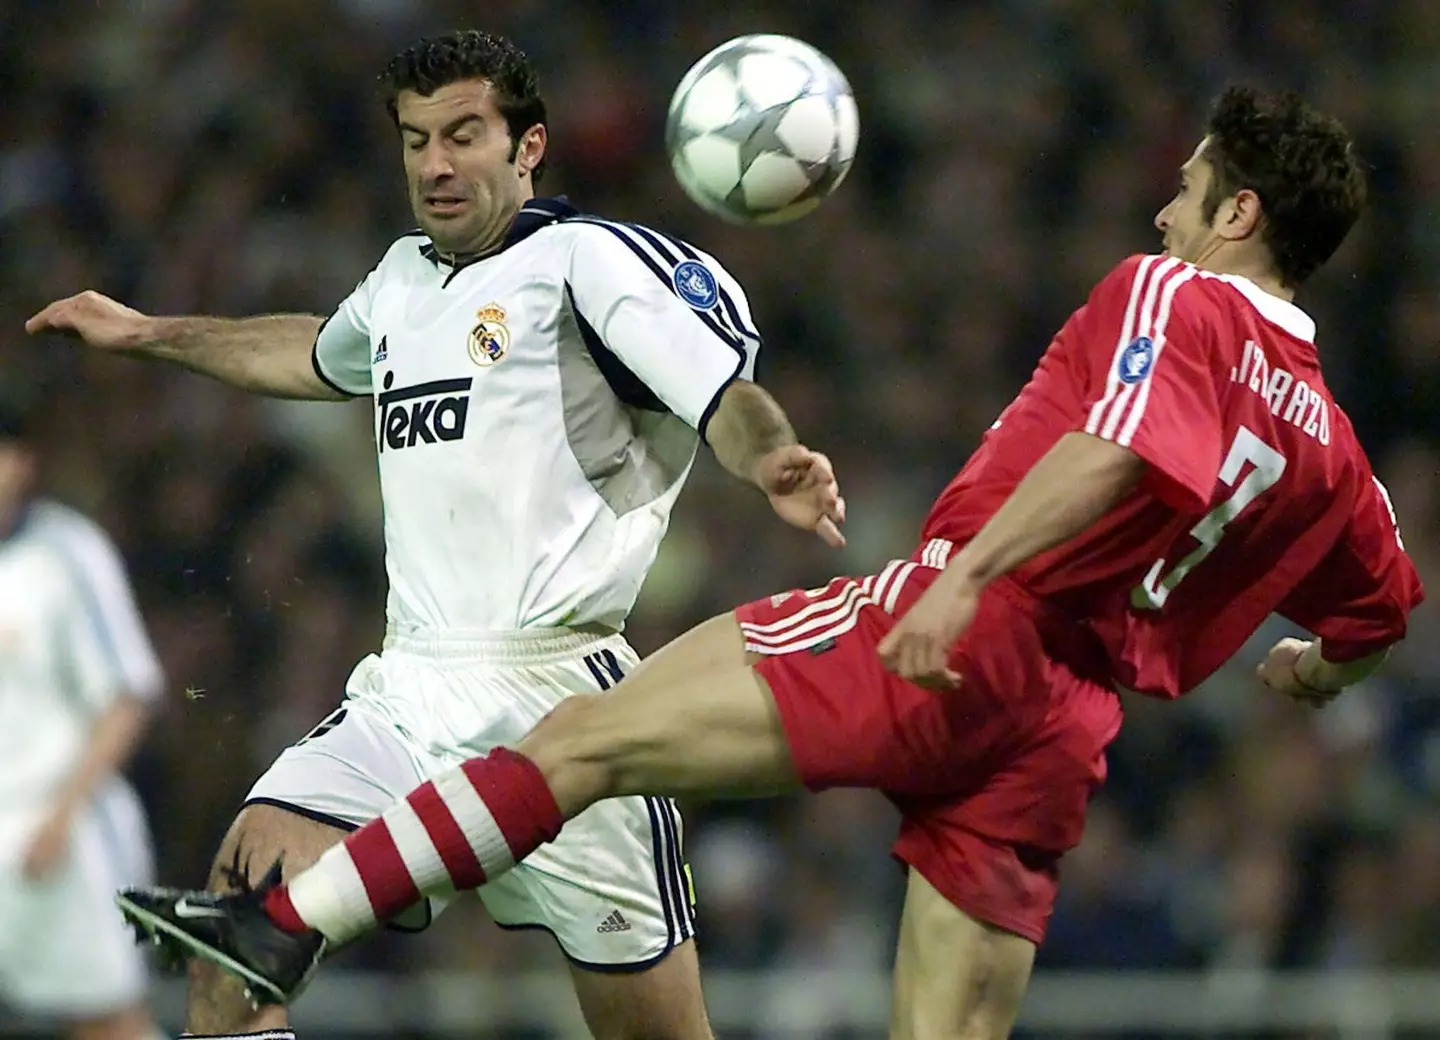 Luis Figo joined Real Madrid from Barcelona, but won everyone over. (Image